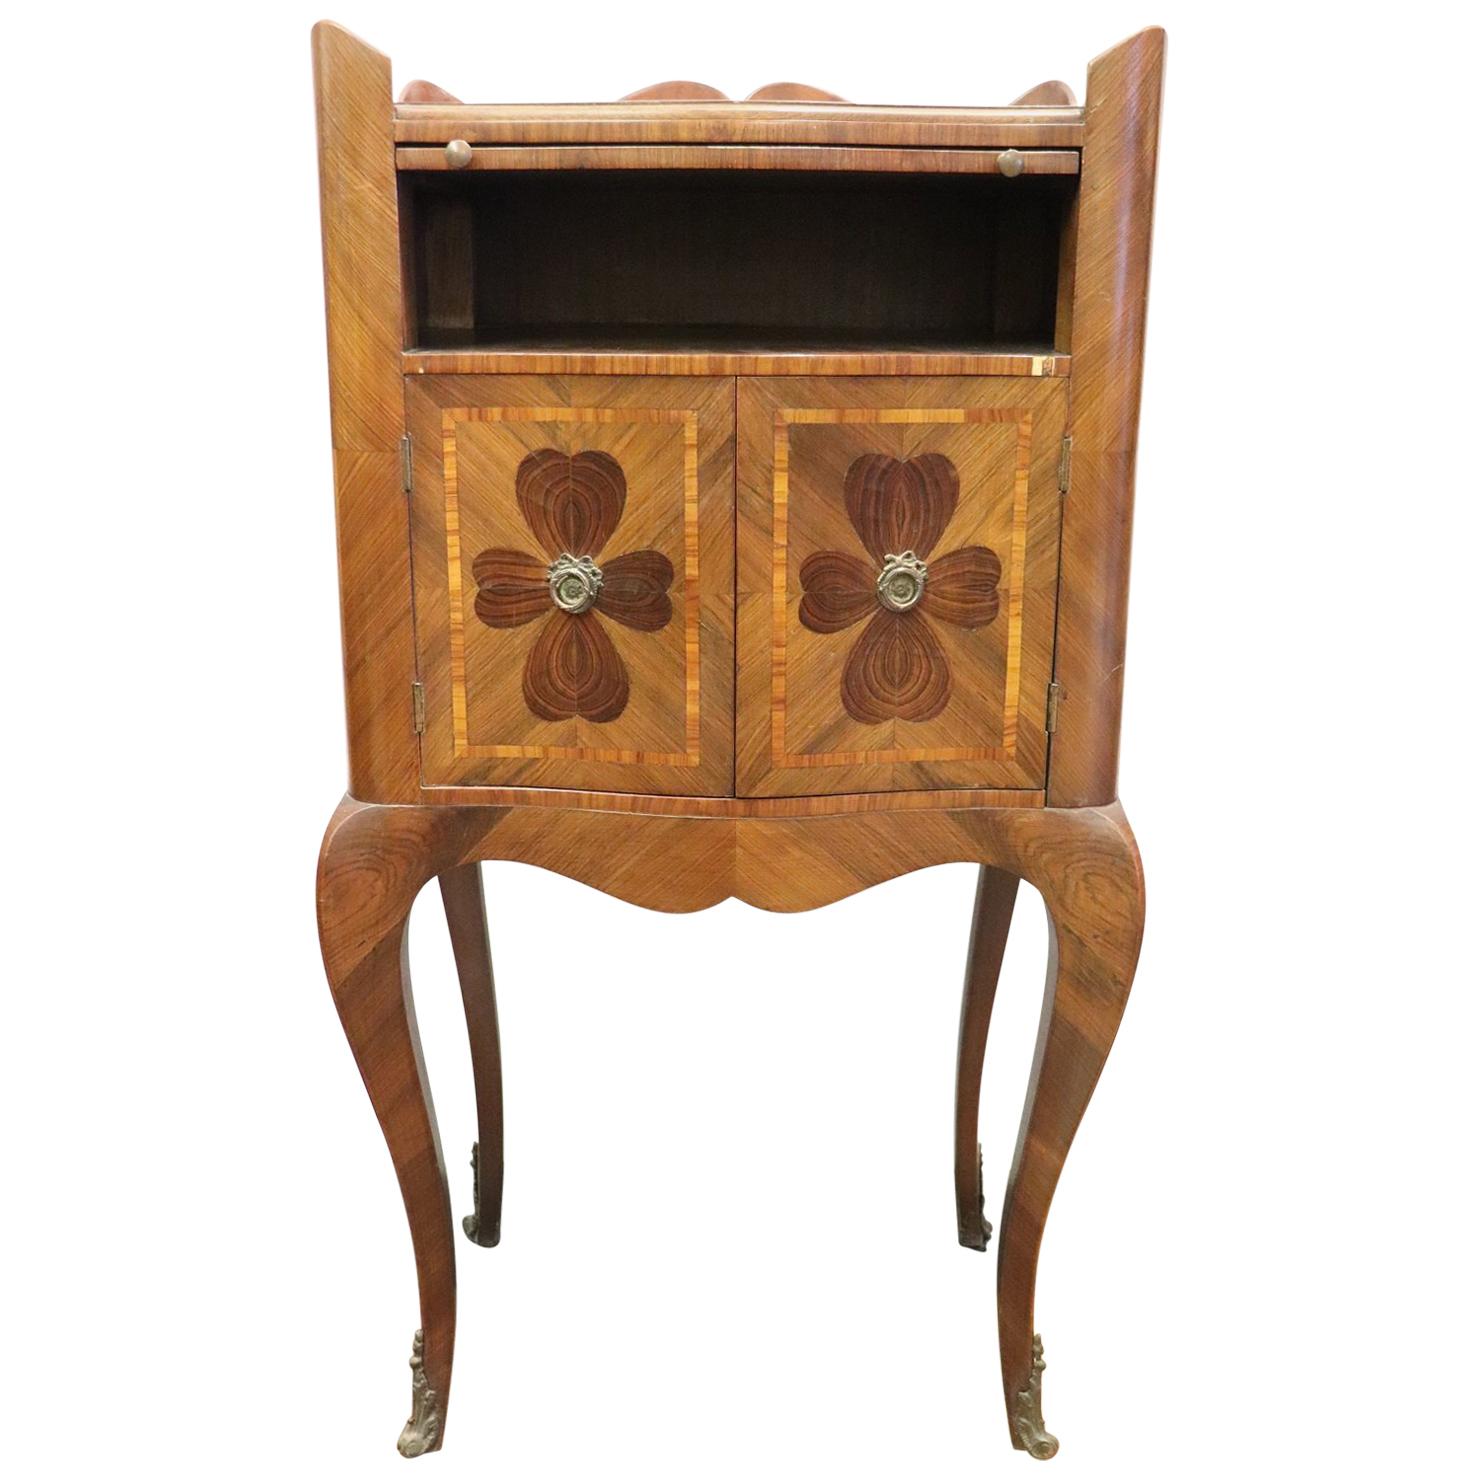 20th Century Italian Louis XV Style Inlay Wood Side Table or Nightstand